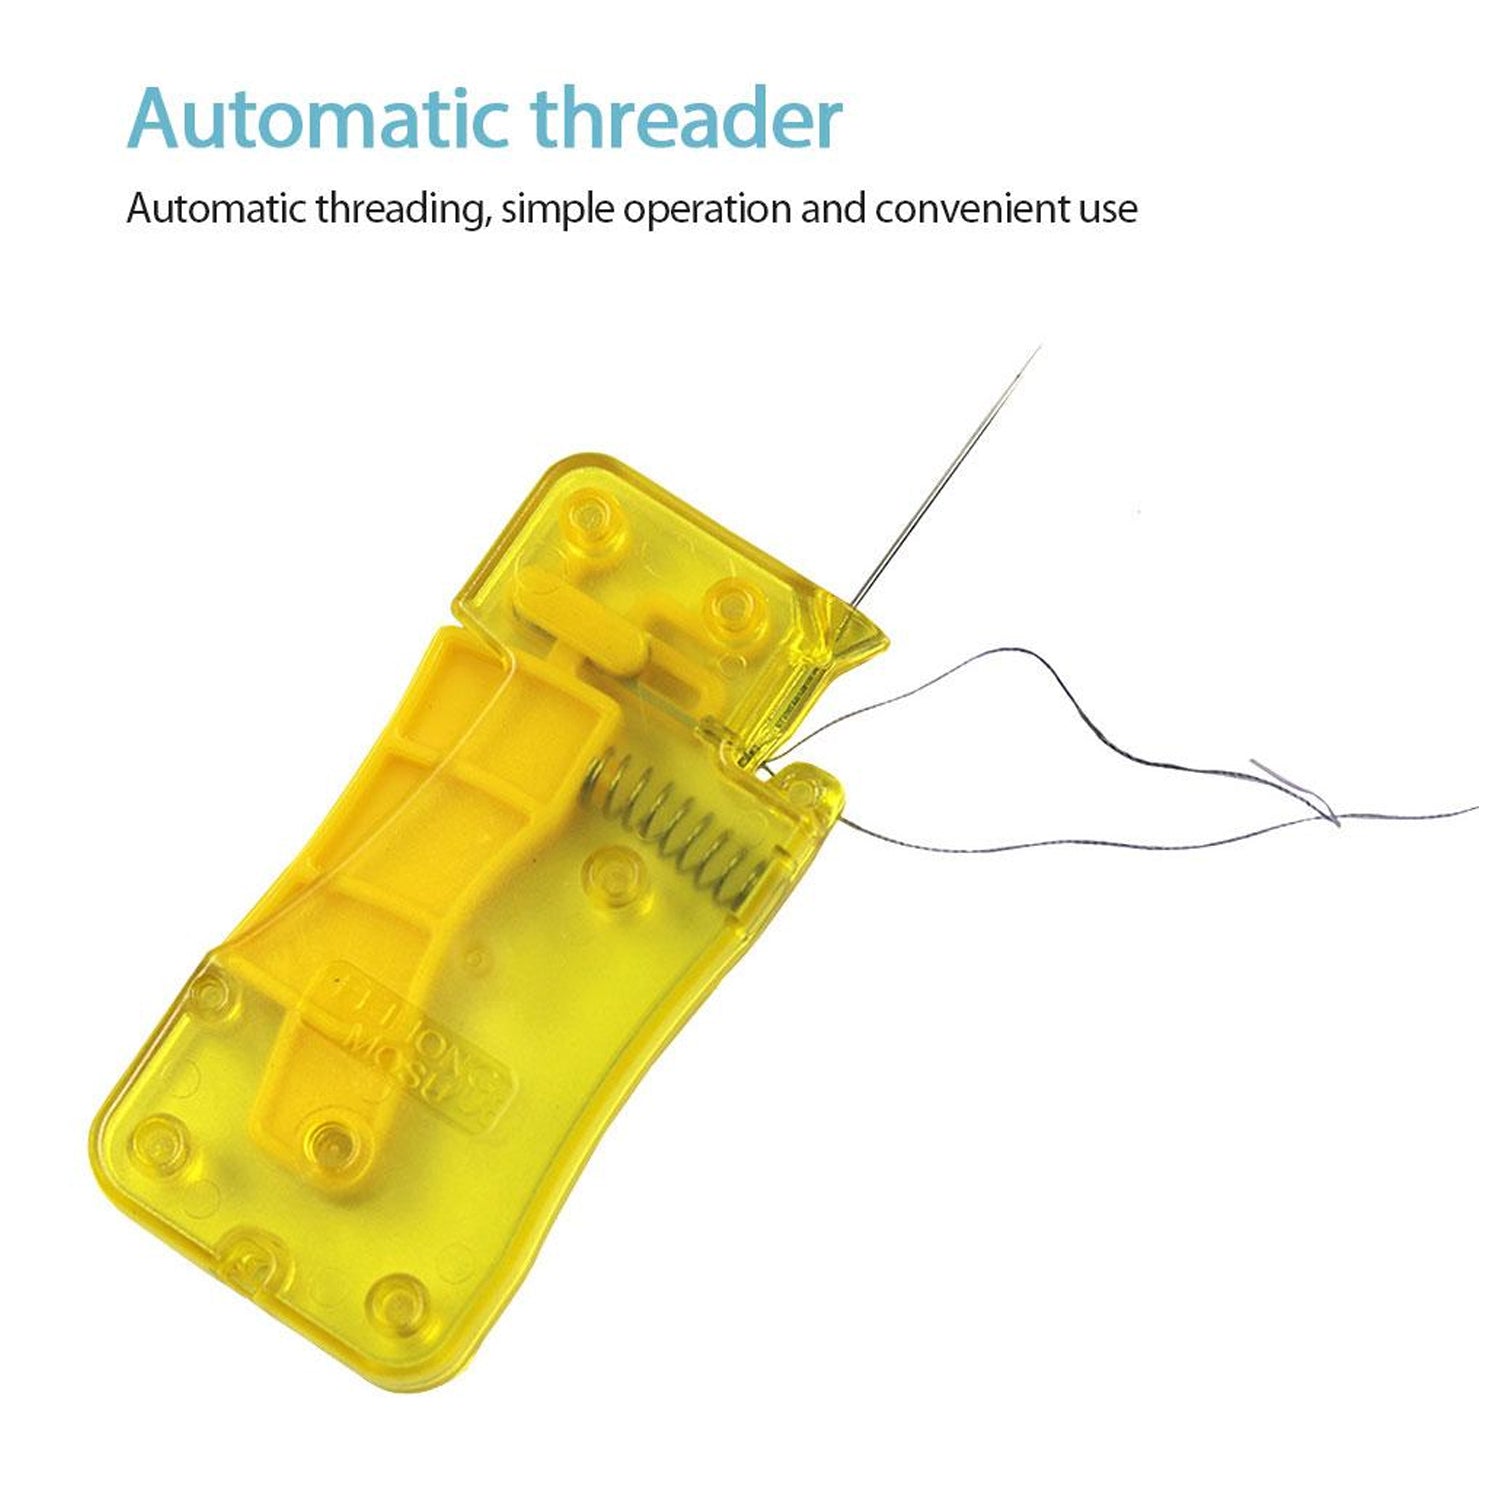 8456 Needle Threader, Stylish Appearance Comfortable Grip Lightweight Portable Automatic Needle Threader for Sewing for Home (1 Pc)